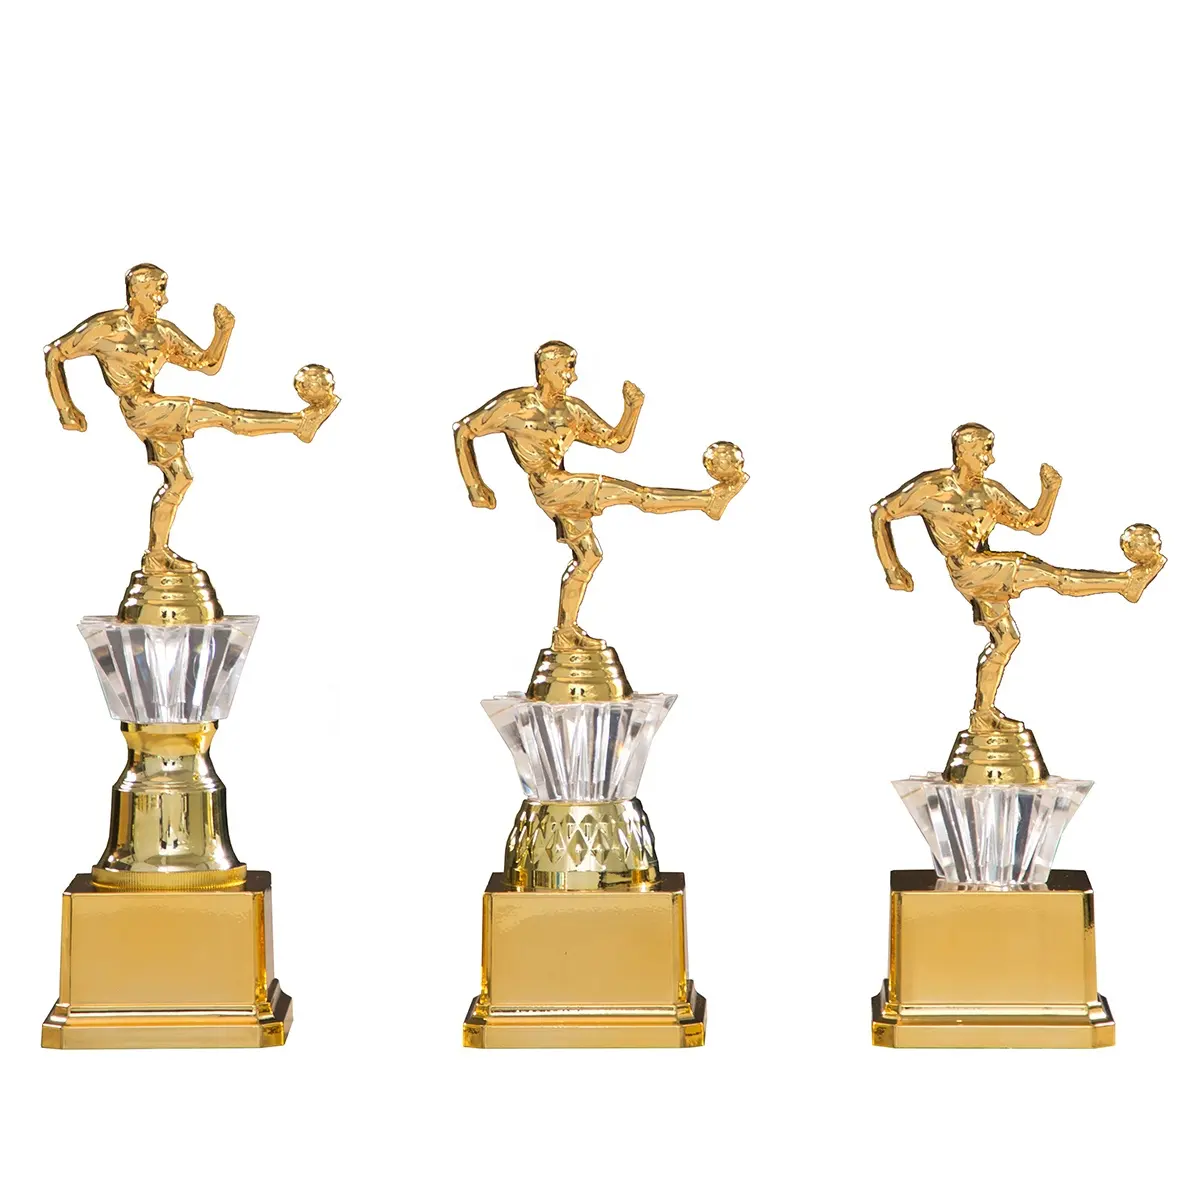 Cheap T32 Unique Crafts Custom Made Plastic Football Soccer Award Trophy for Sports Meeting